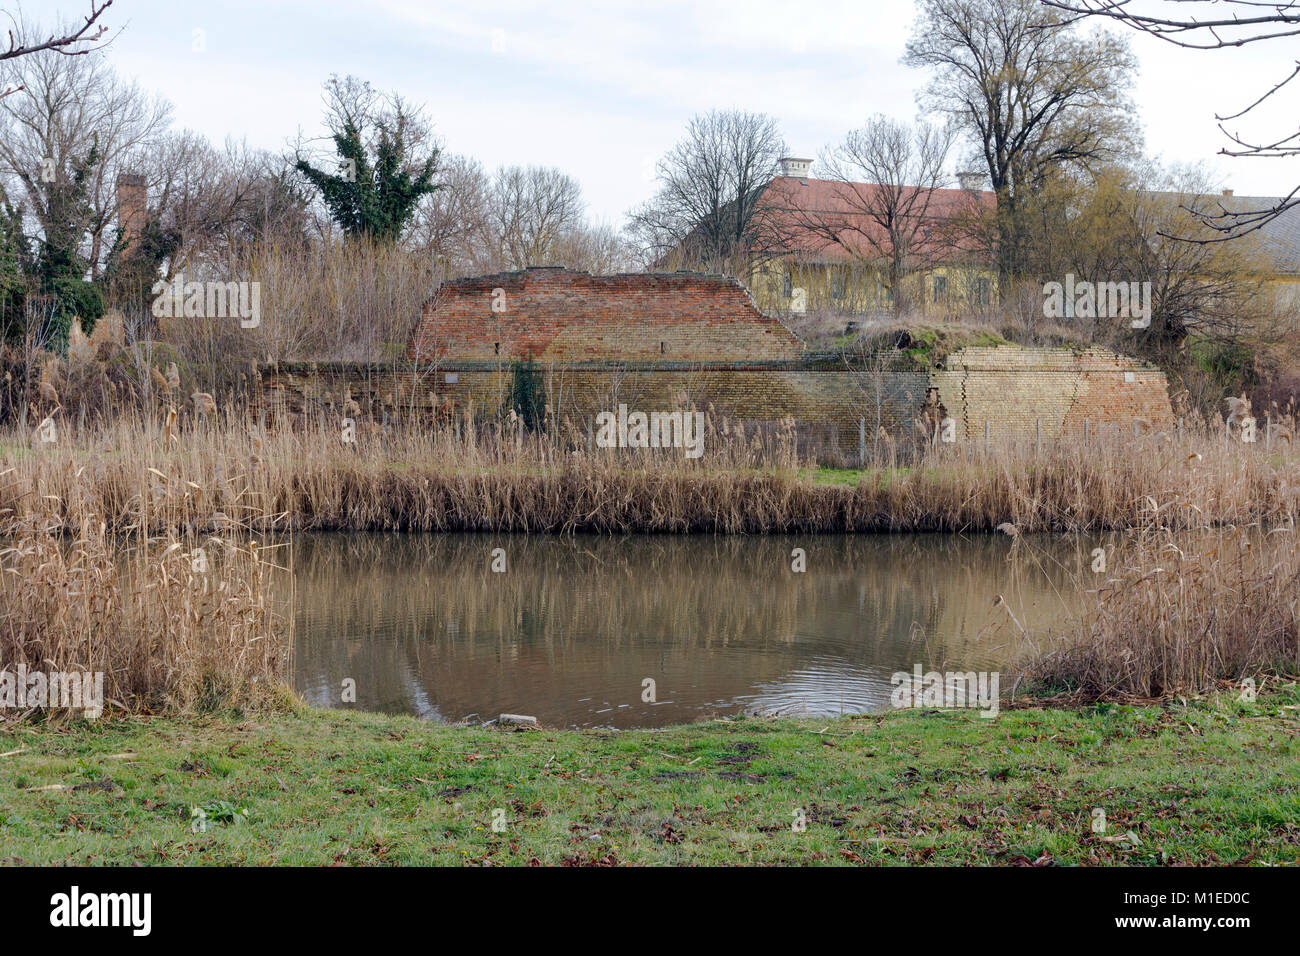 Ruined wall of the baroque fort with the Kurca river foreground in Szegvar, Hungary Stock Photo